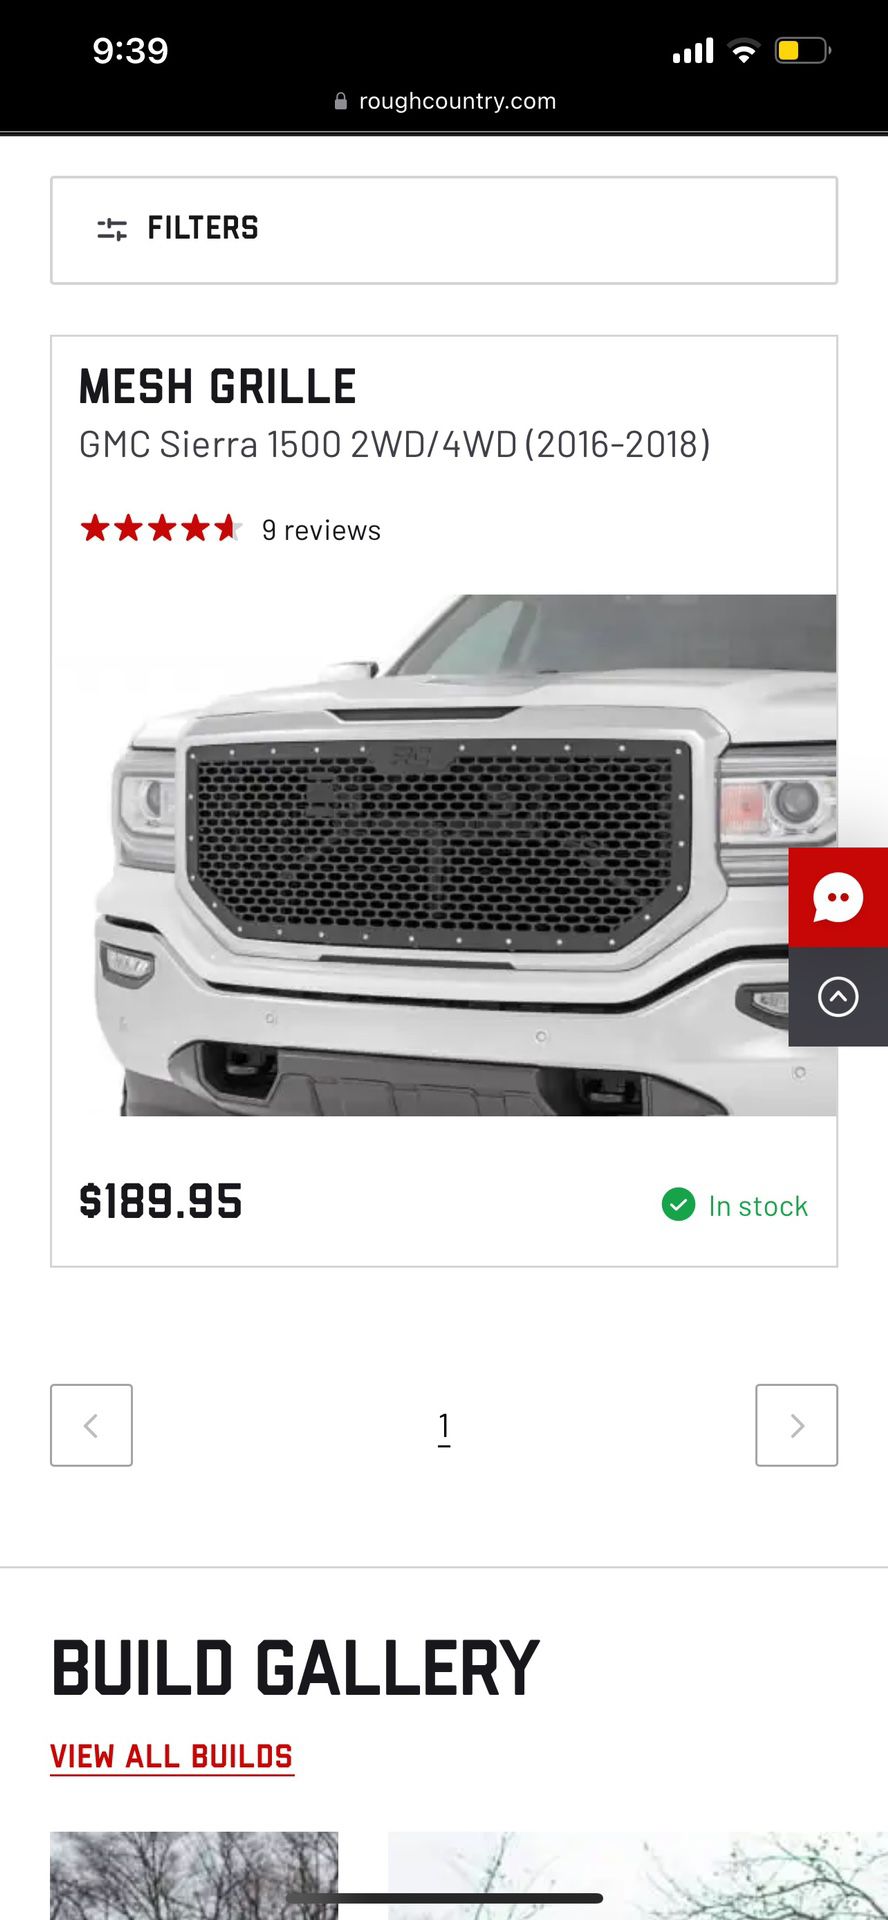 Have grille for $130  “2016-2018 GMC Sierra 1500 mesh grille” Pm if interested 